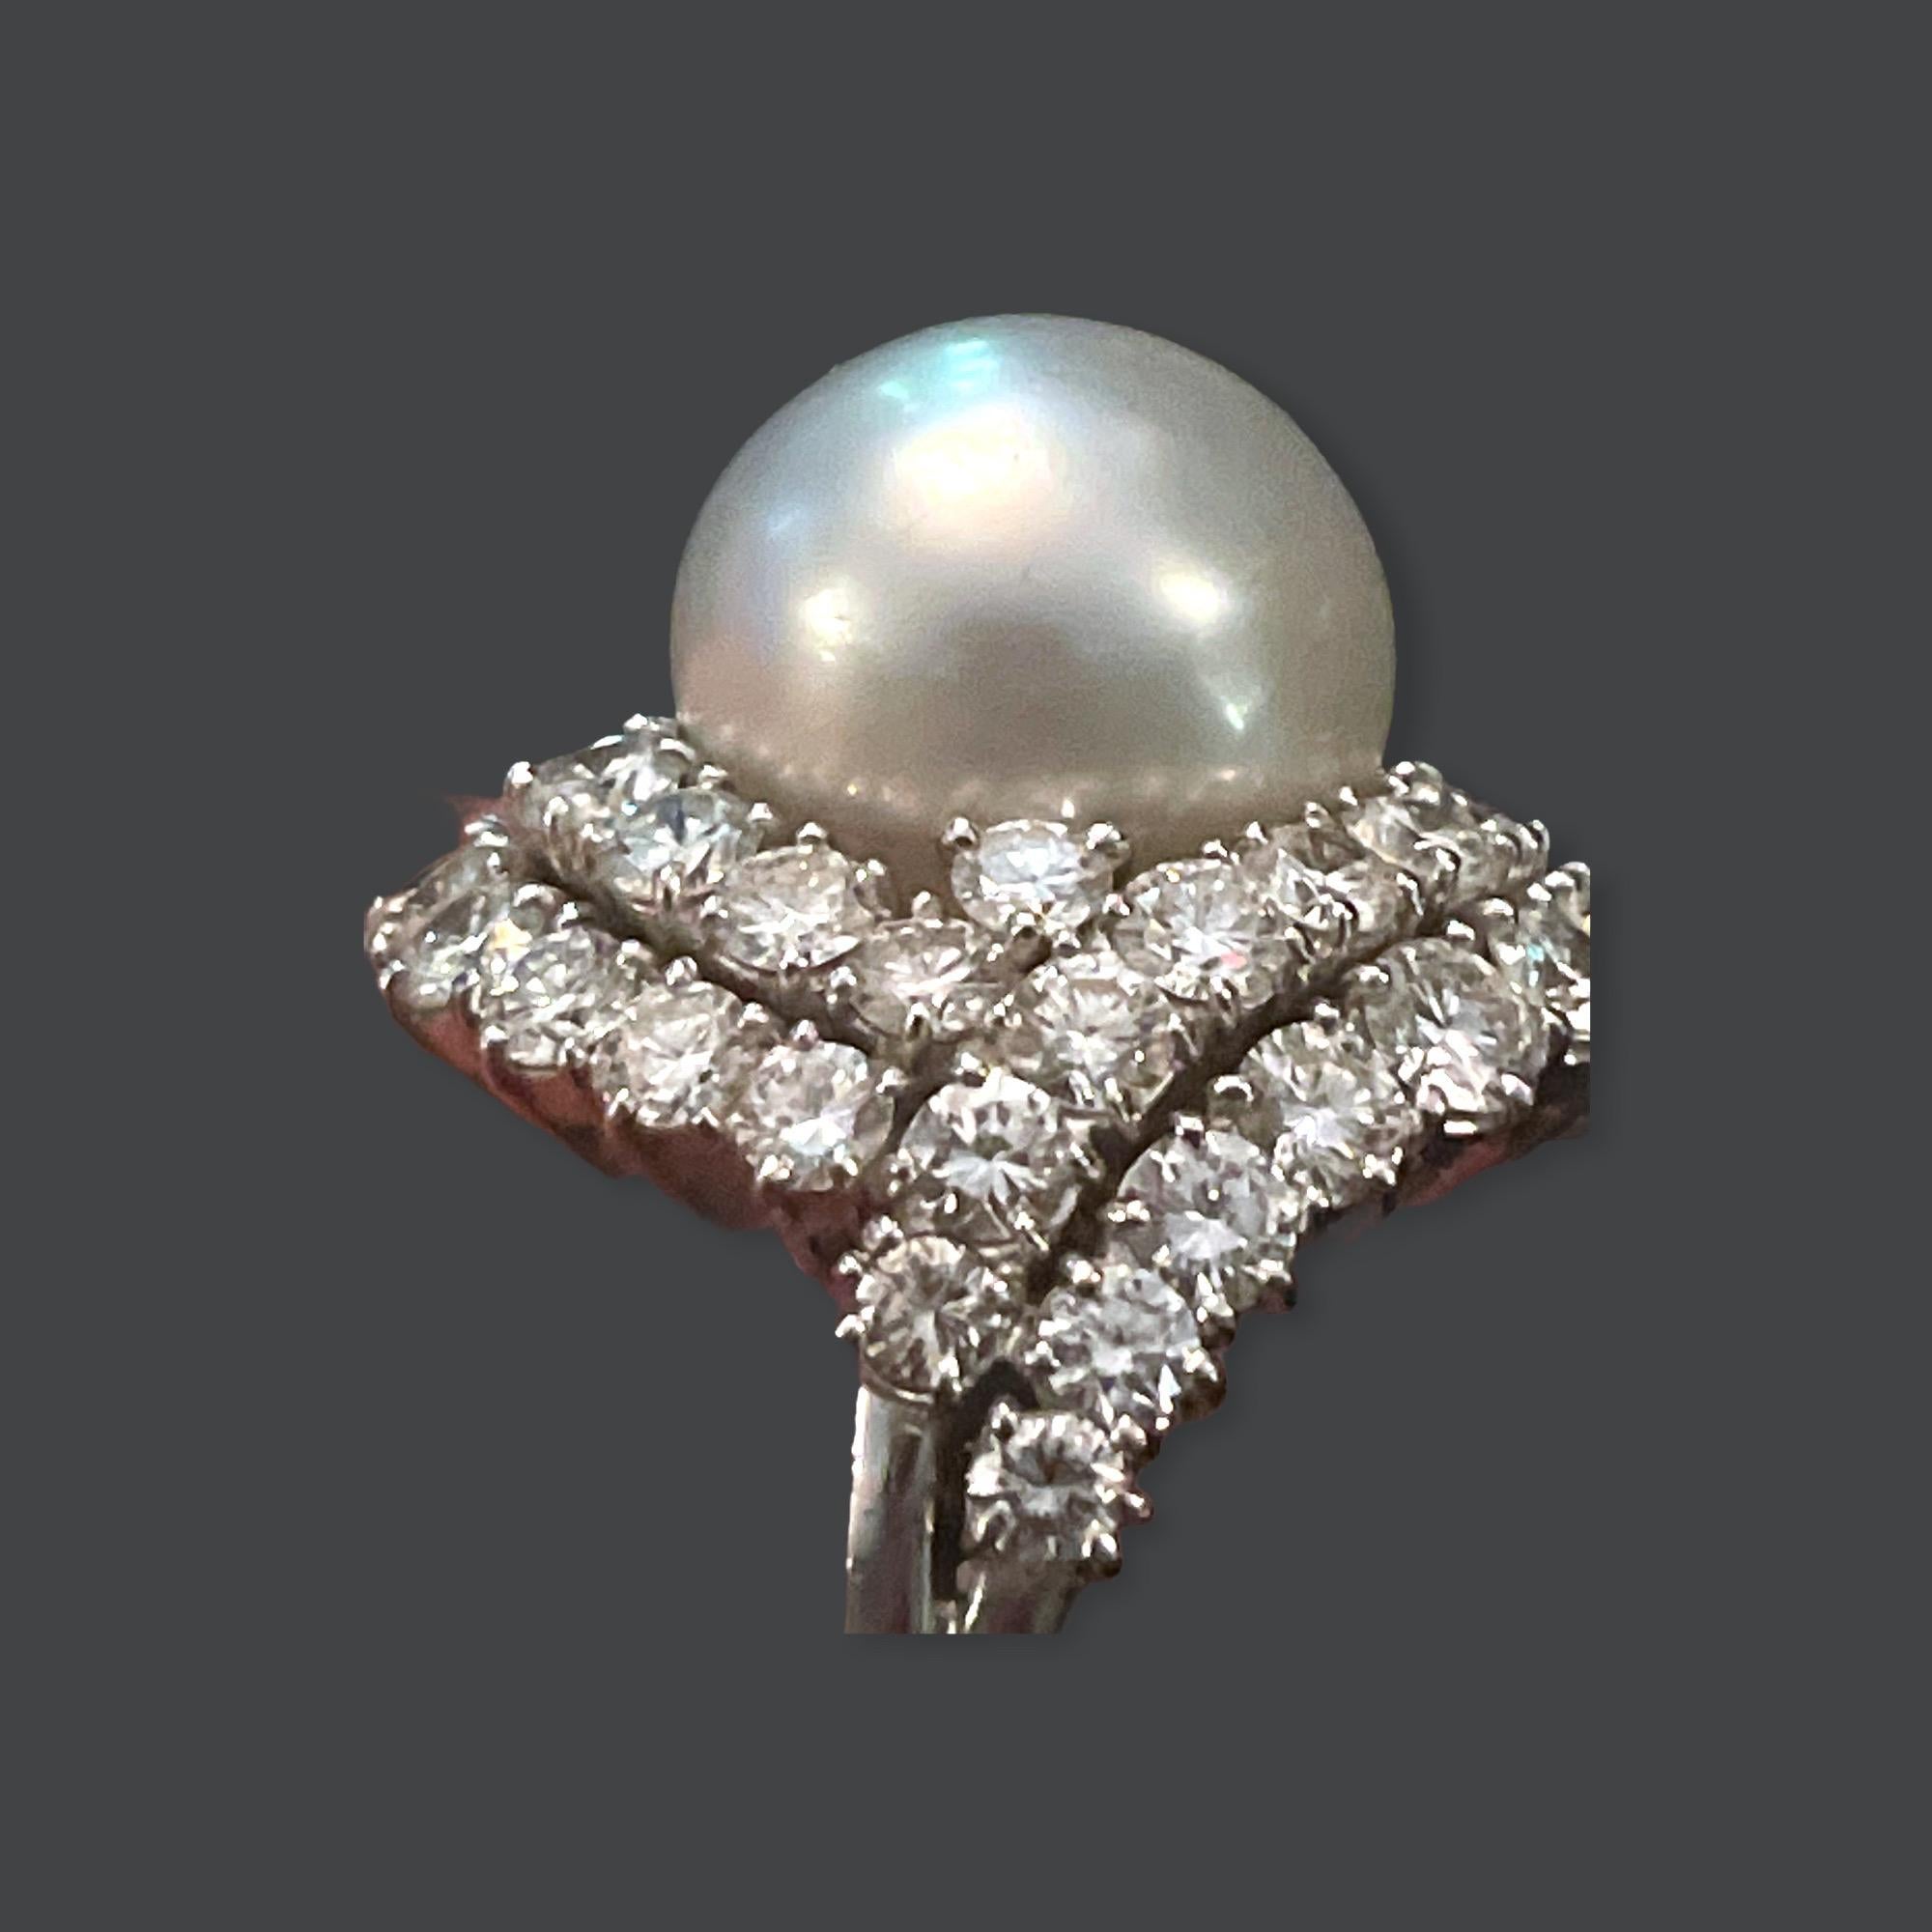 Van Cleef and Arpels Platinum and Diamond Ring featuring a very fine white South Sea Tahitian Pearl measuring approximately 13.3mm surrounded by 2 rows of 48 Round Brilliant Cut Diamonds approximately 5.30 carats in total. The ring is signed 